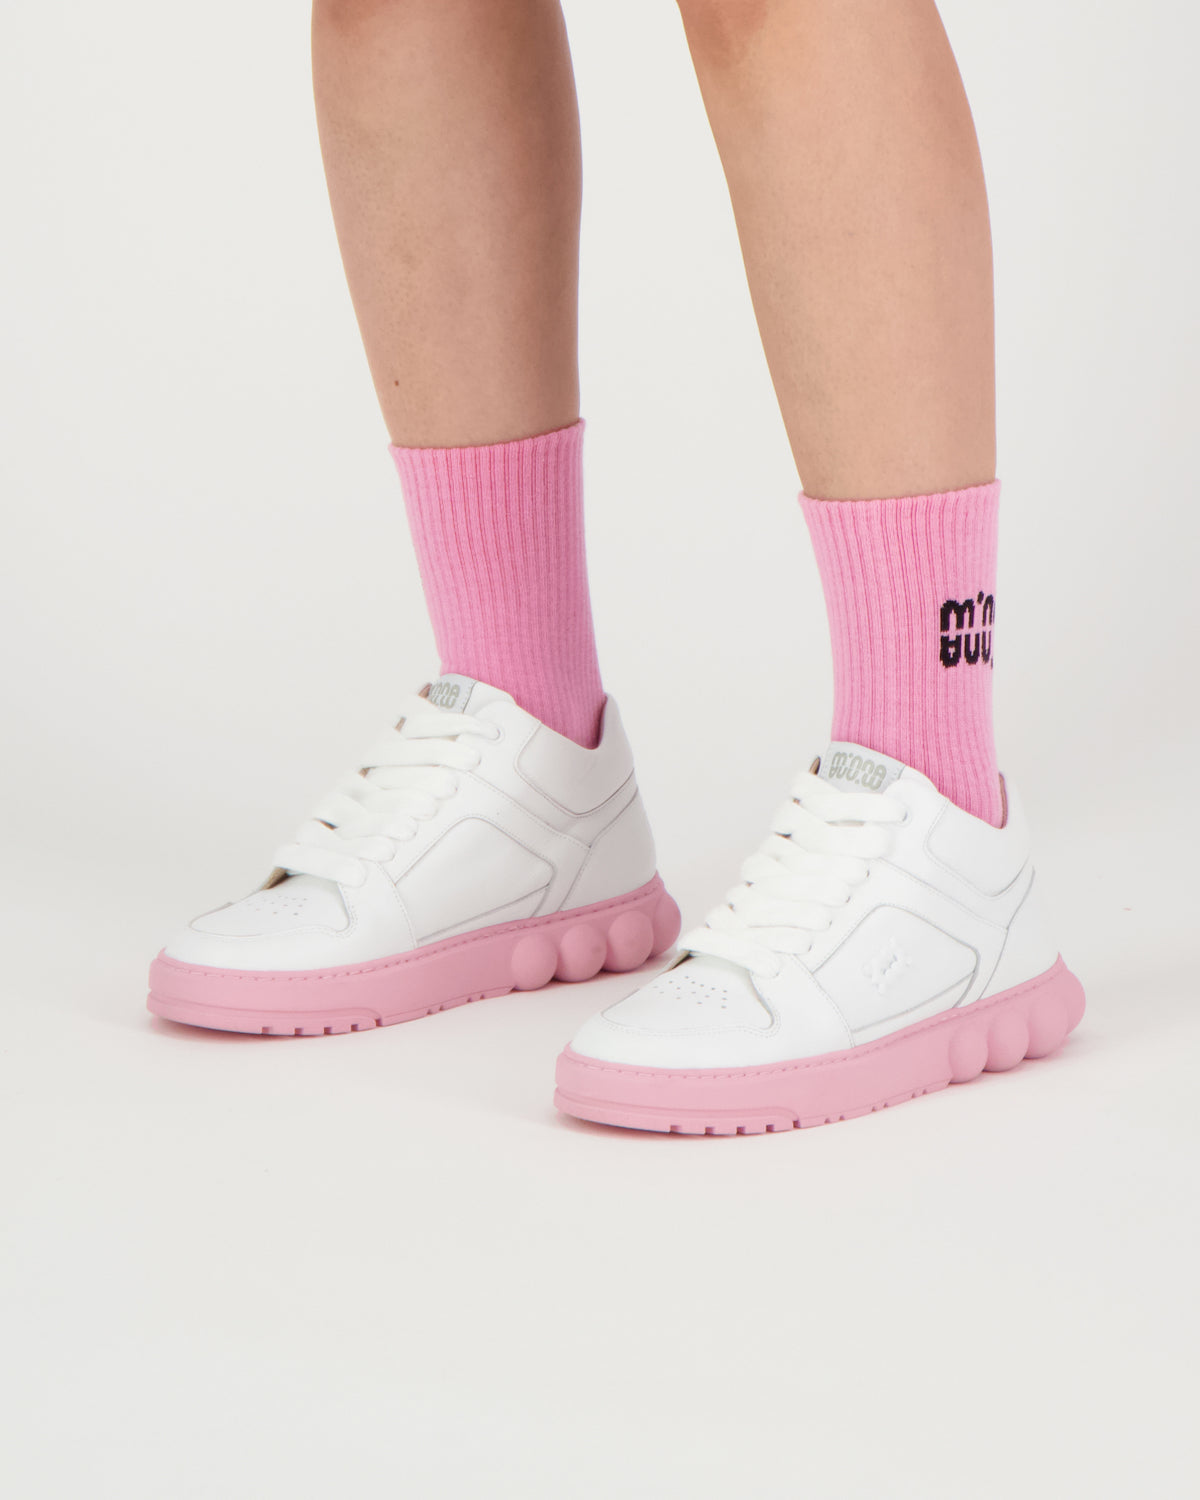 LOVE PROTECTION Candy Socks